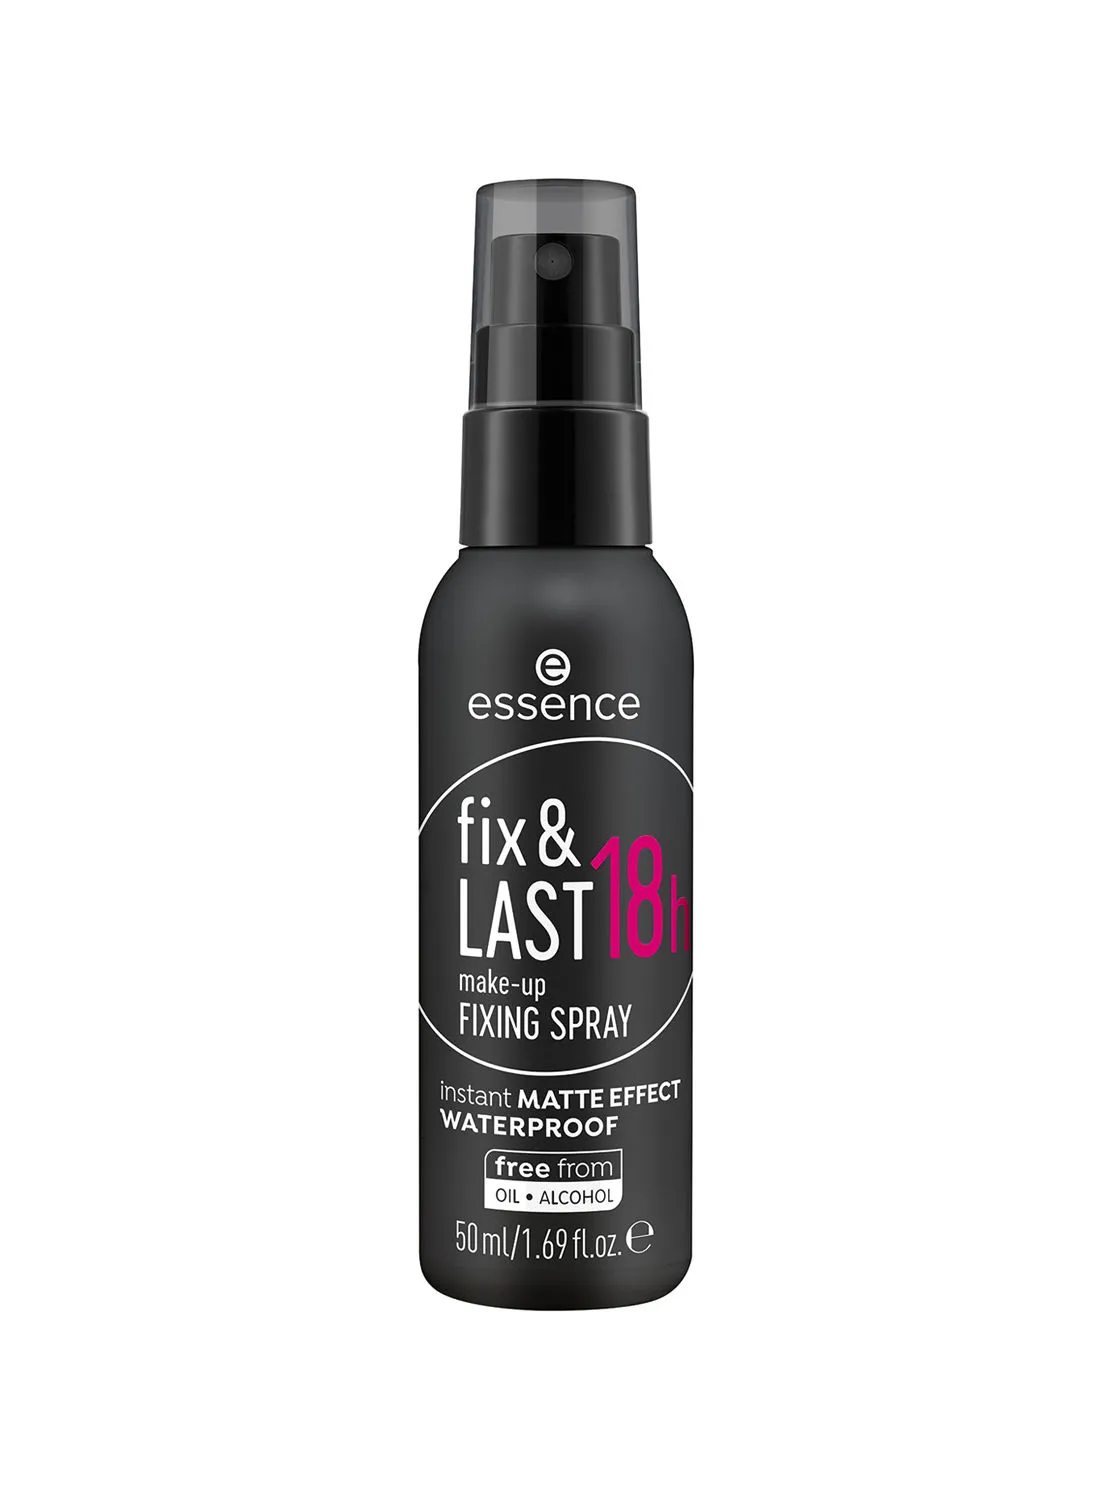 Essence Fix And Last 18h Make-Up Fix. Spray Clear